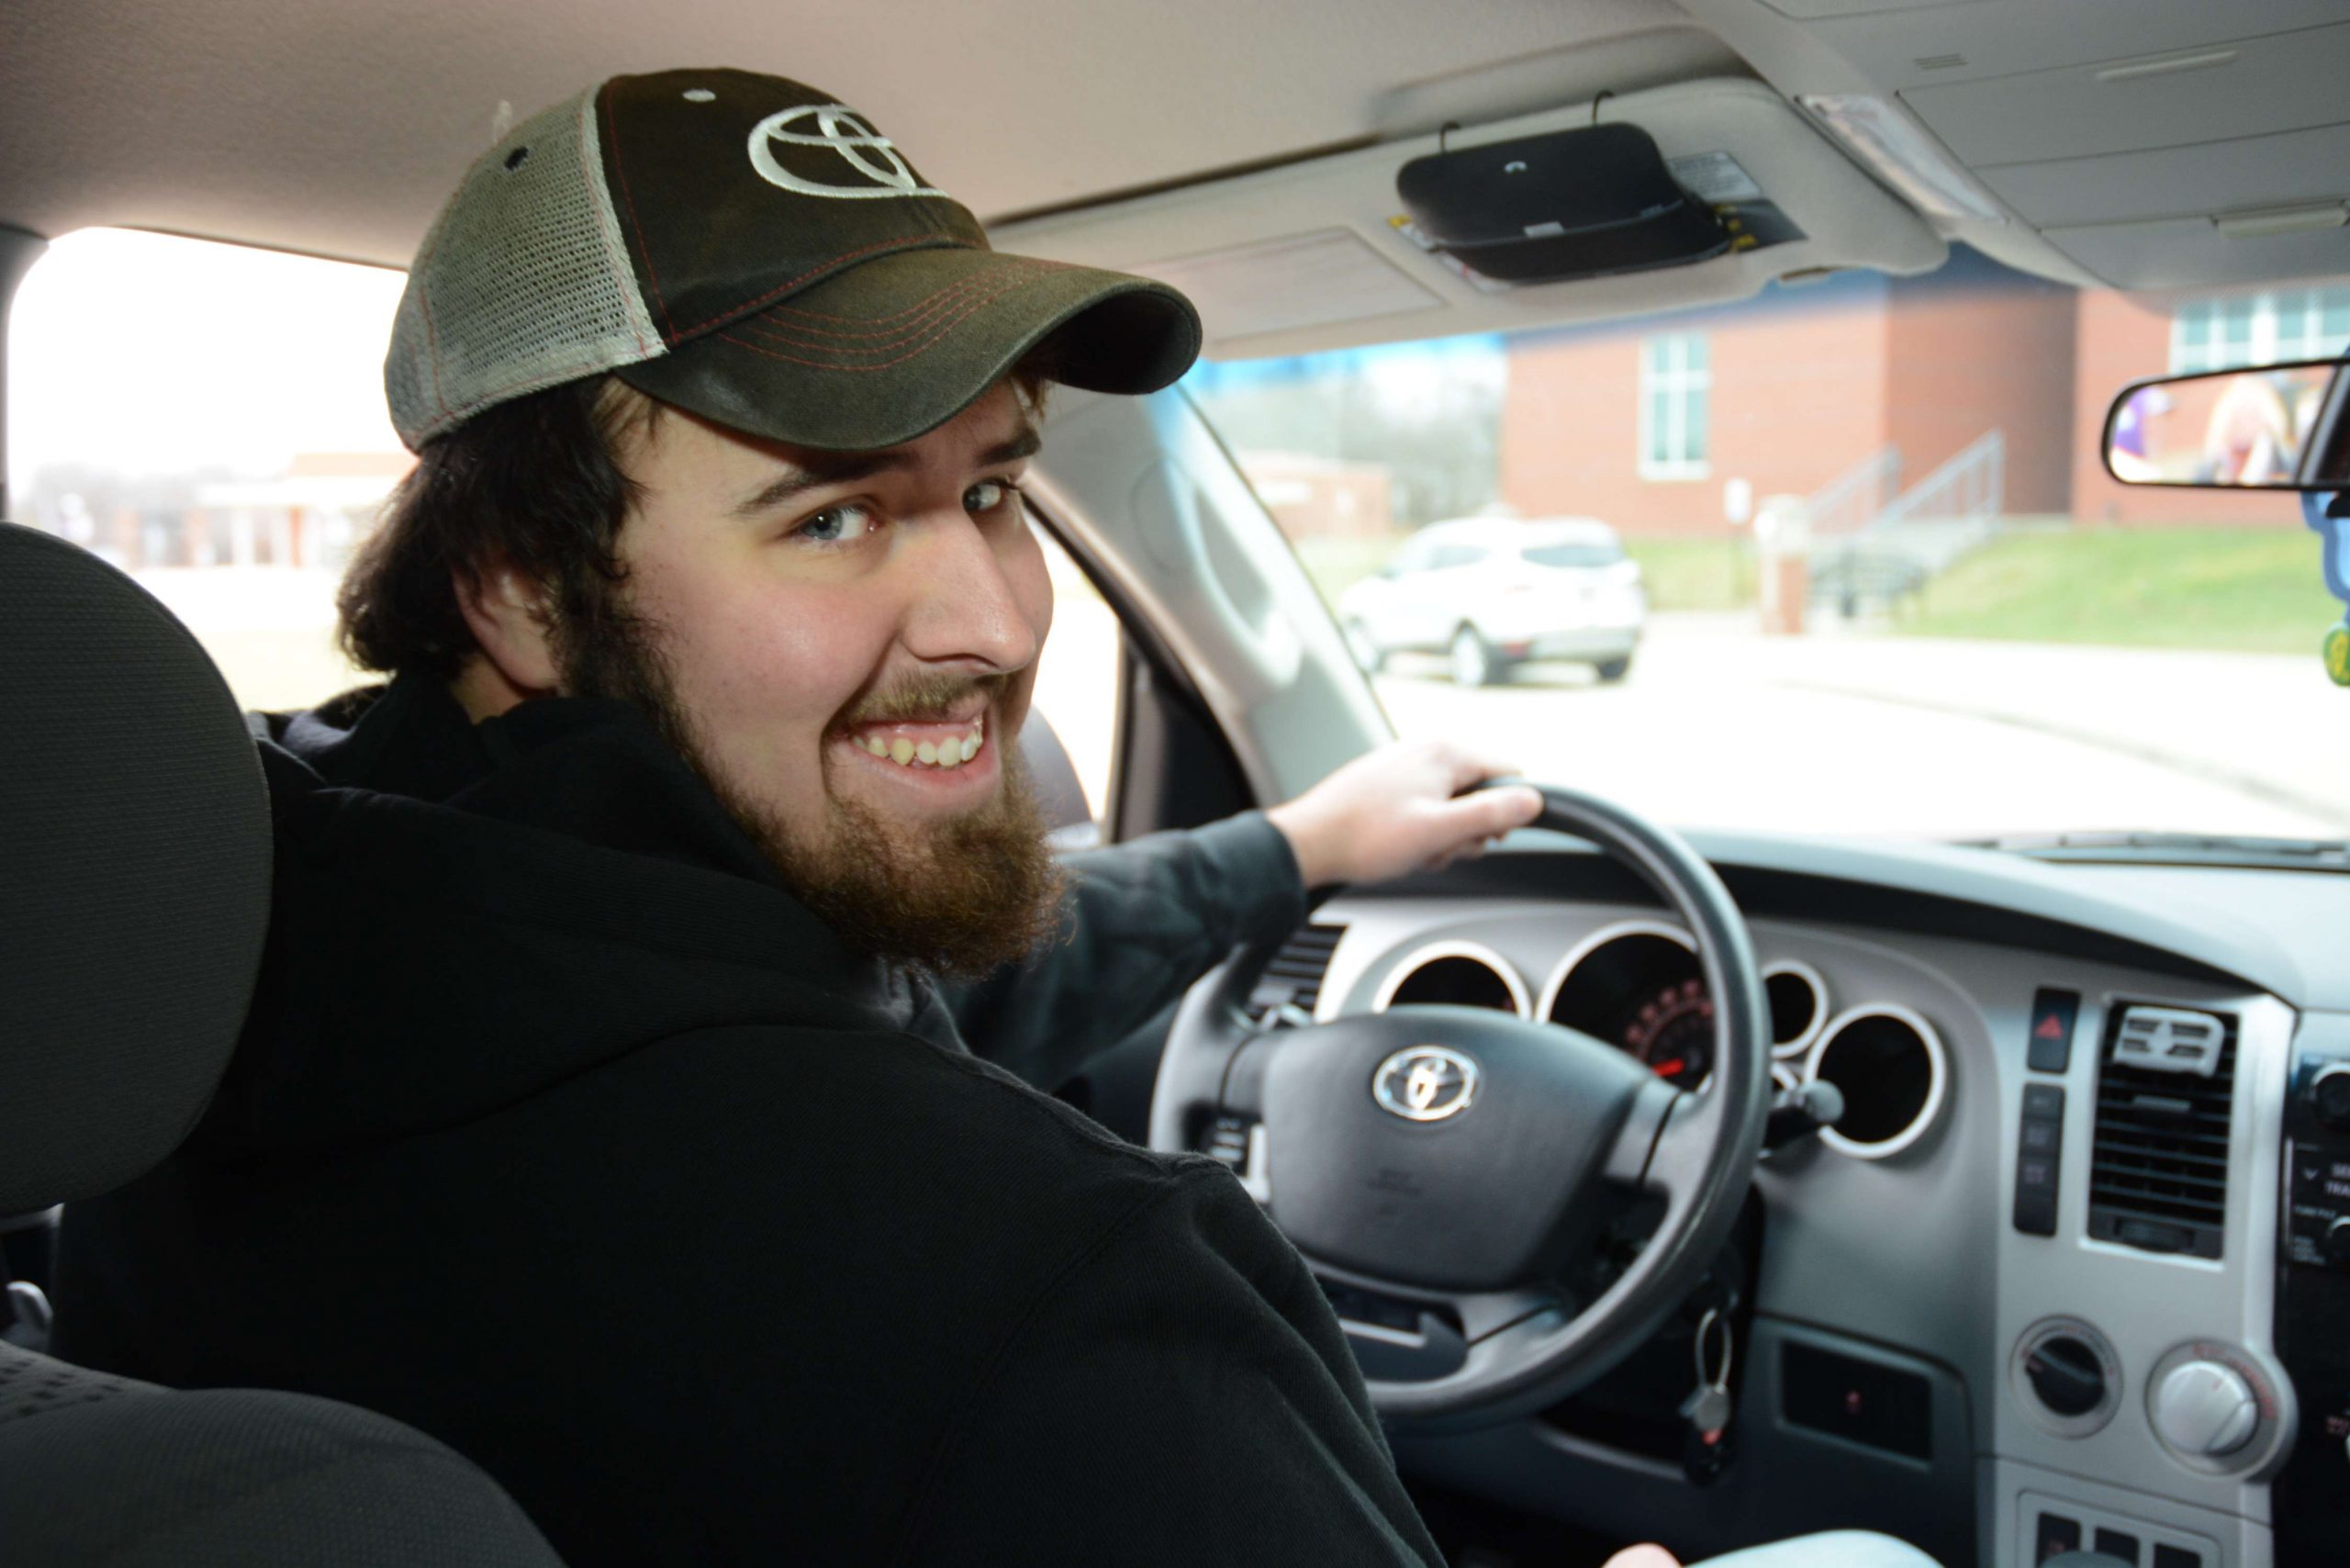 Meet College Series angler Austin Chapman. The 21-year-old angler is a senior at McKendree University, and heâs majoring in Environmental Science. Weâre touring his 2008 Toyota Tundra SR5. 